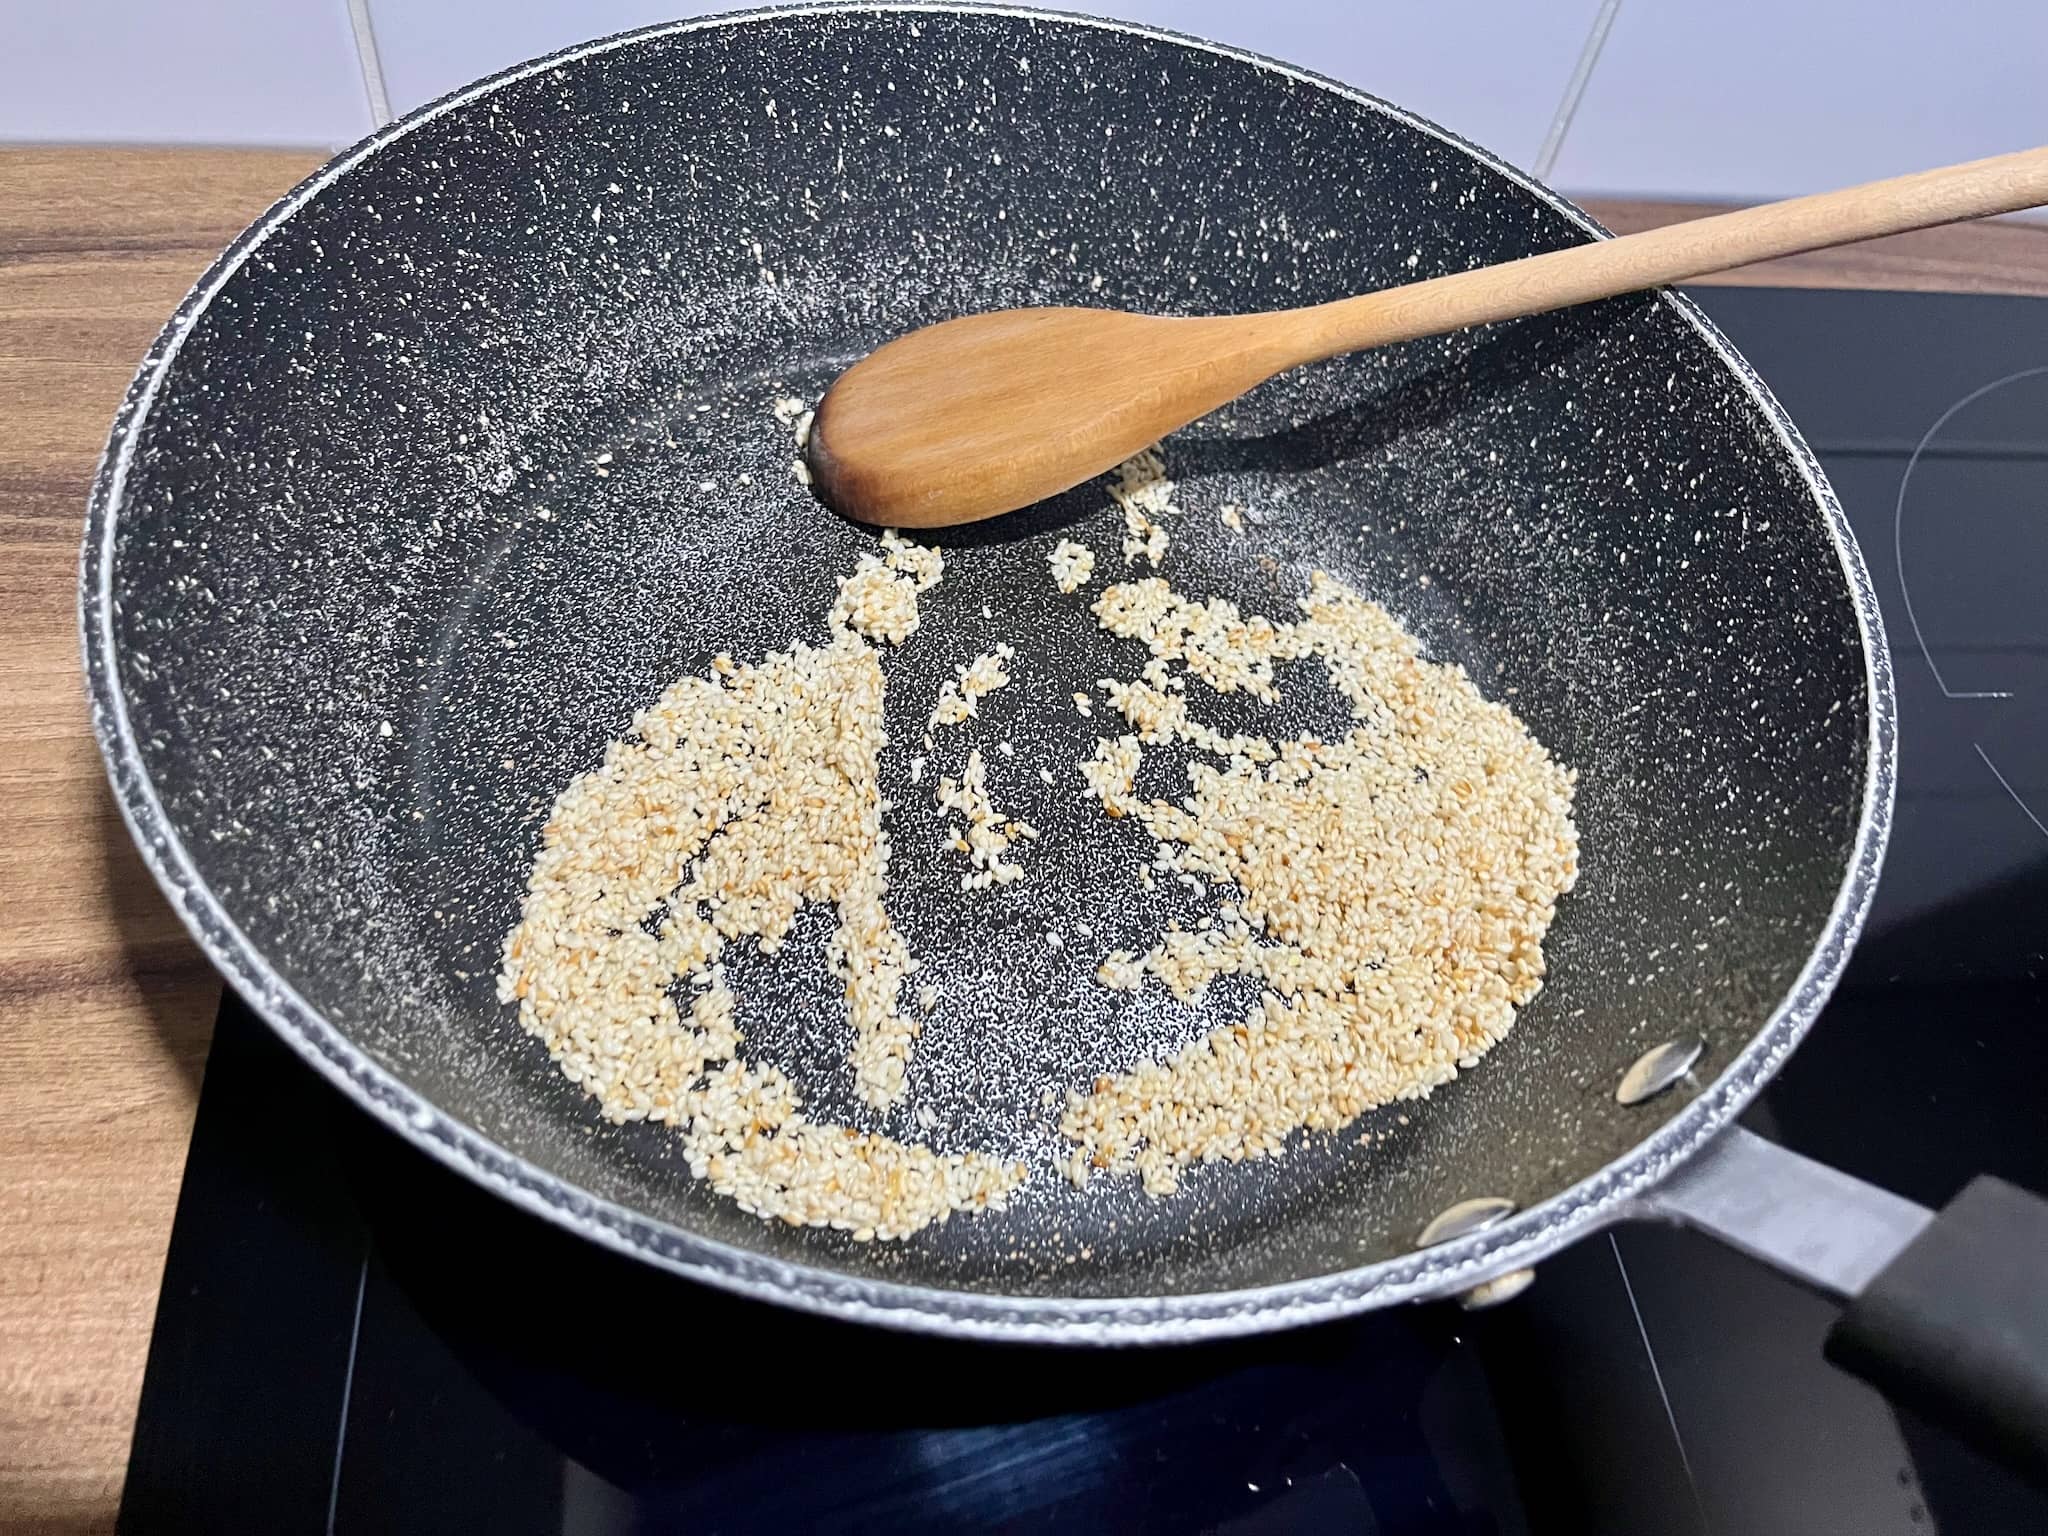 Frying seeds in a pan